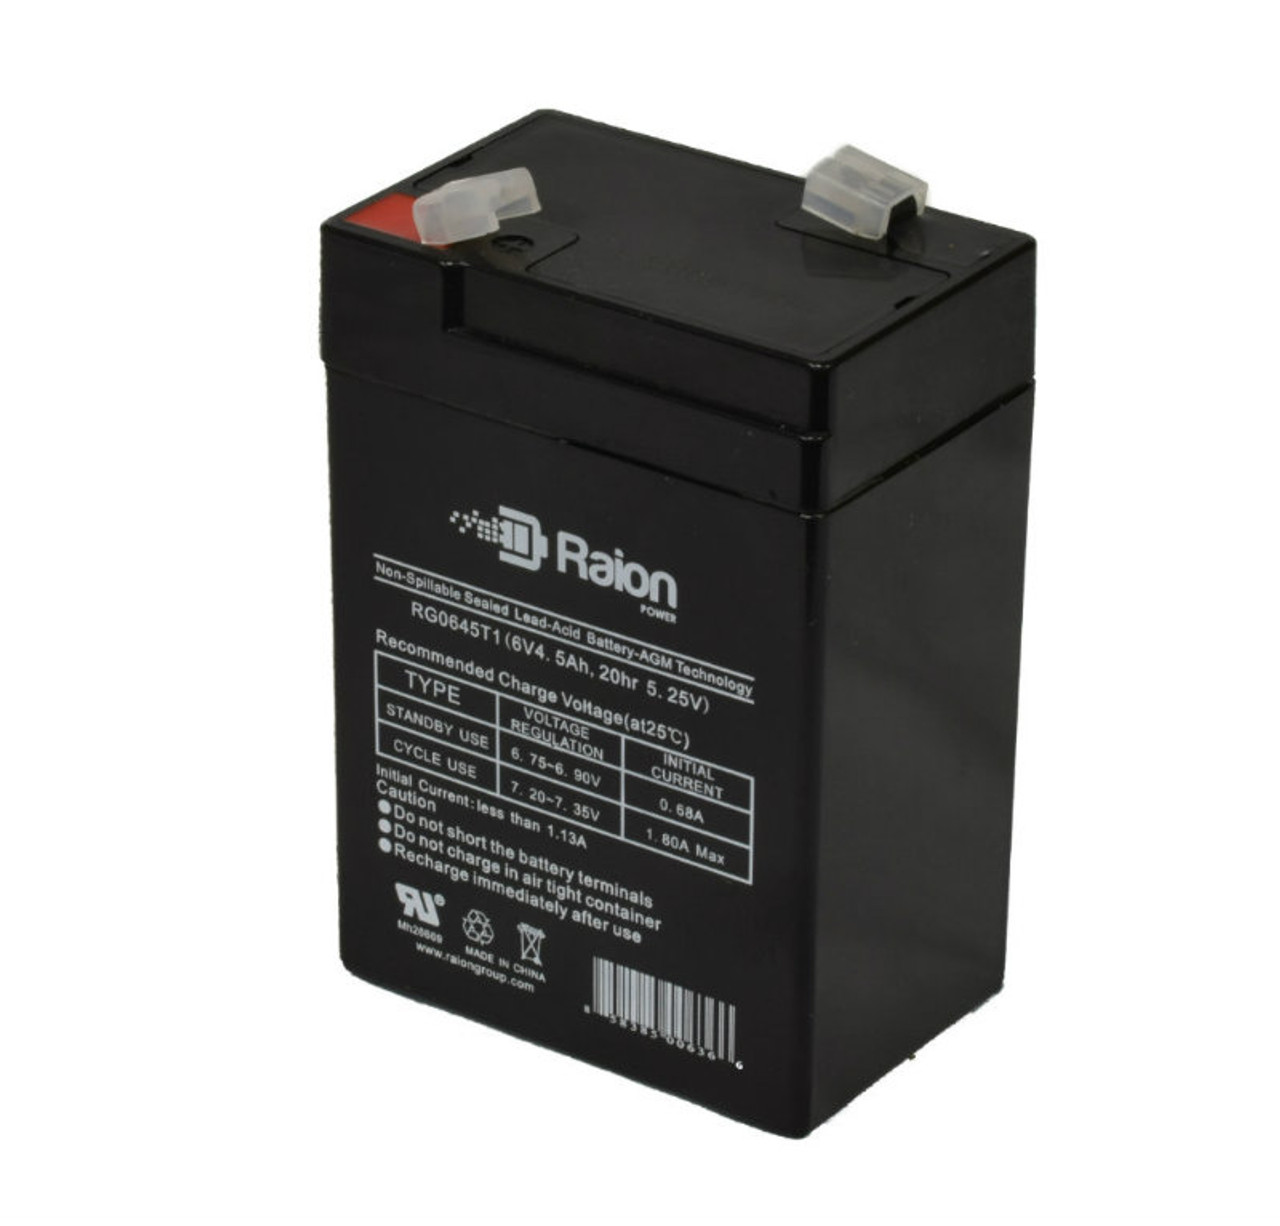 Raion Power RG0645T1 6V 4.5Ah Replacement Battery Cartridge for Lithonia EM1060601